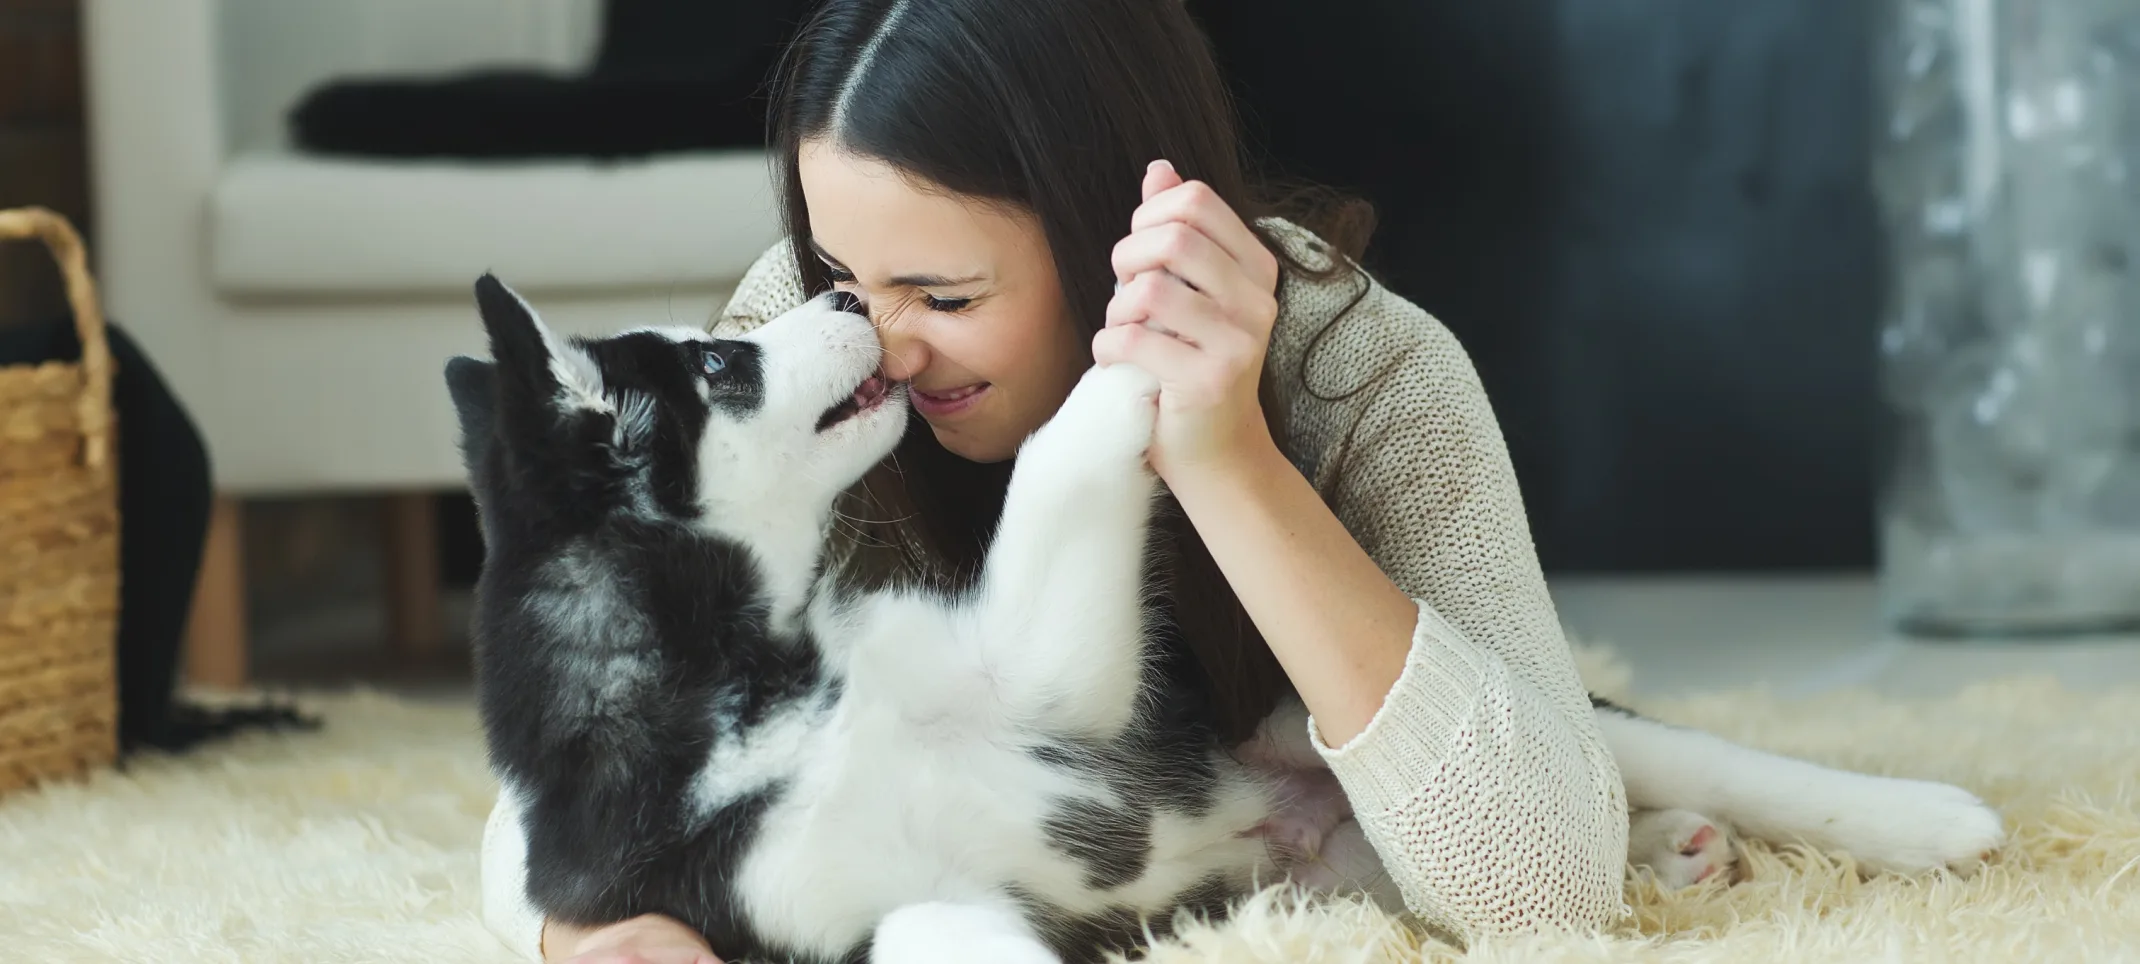 Dog kissing woman on the nose